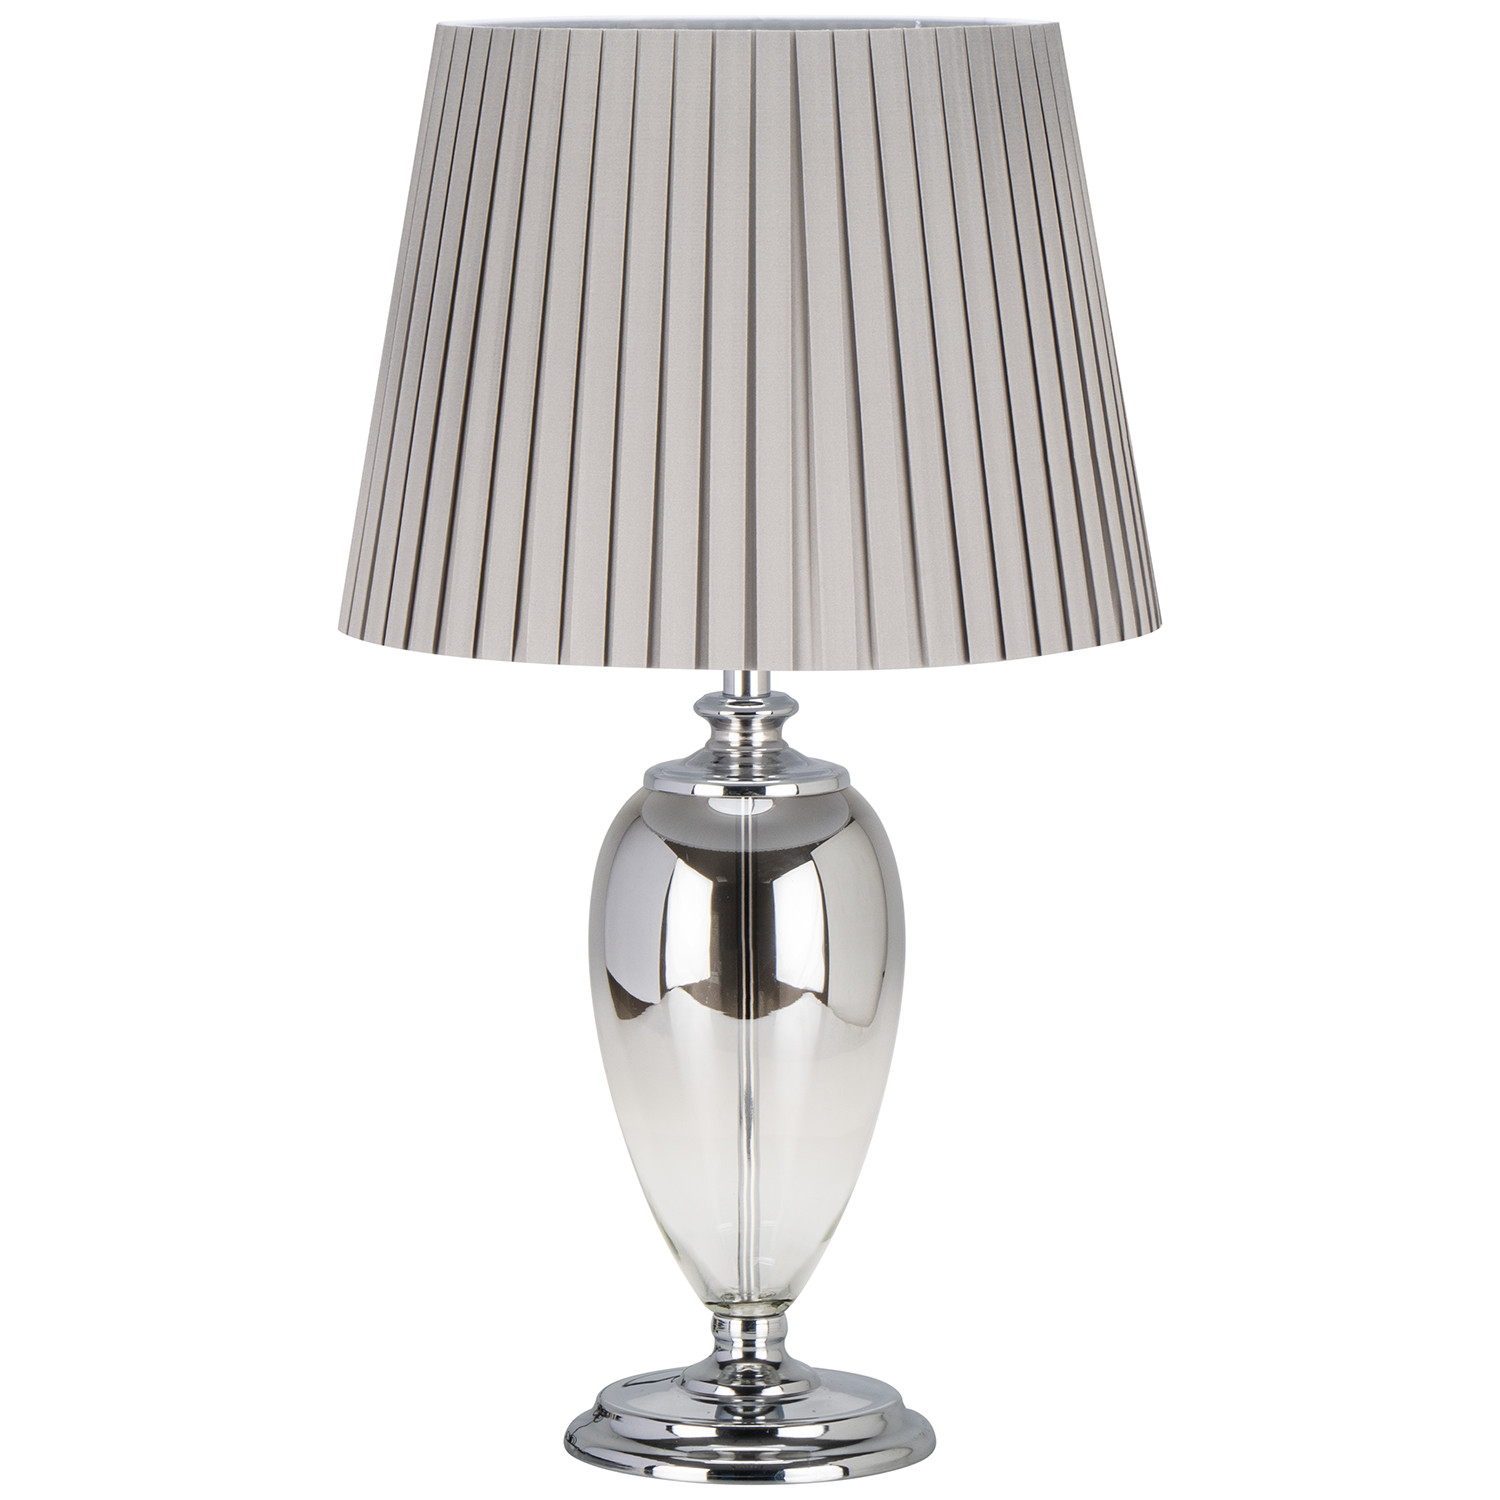 Smoked Grey Glass Table Lamp with Pleated Shade Image 1